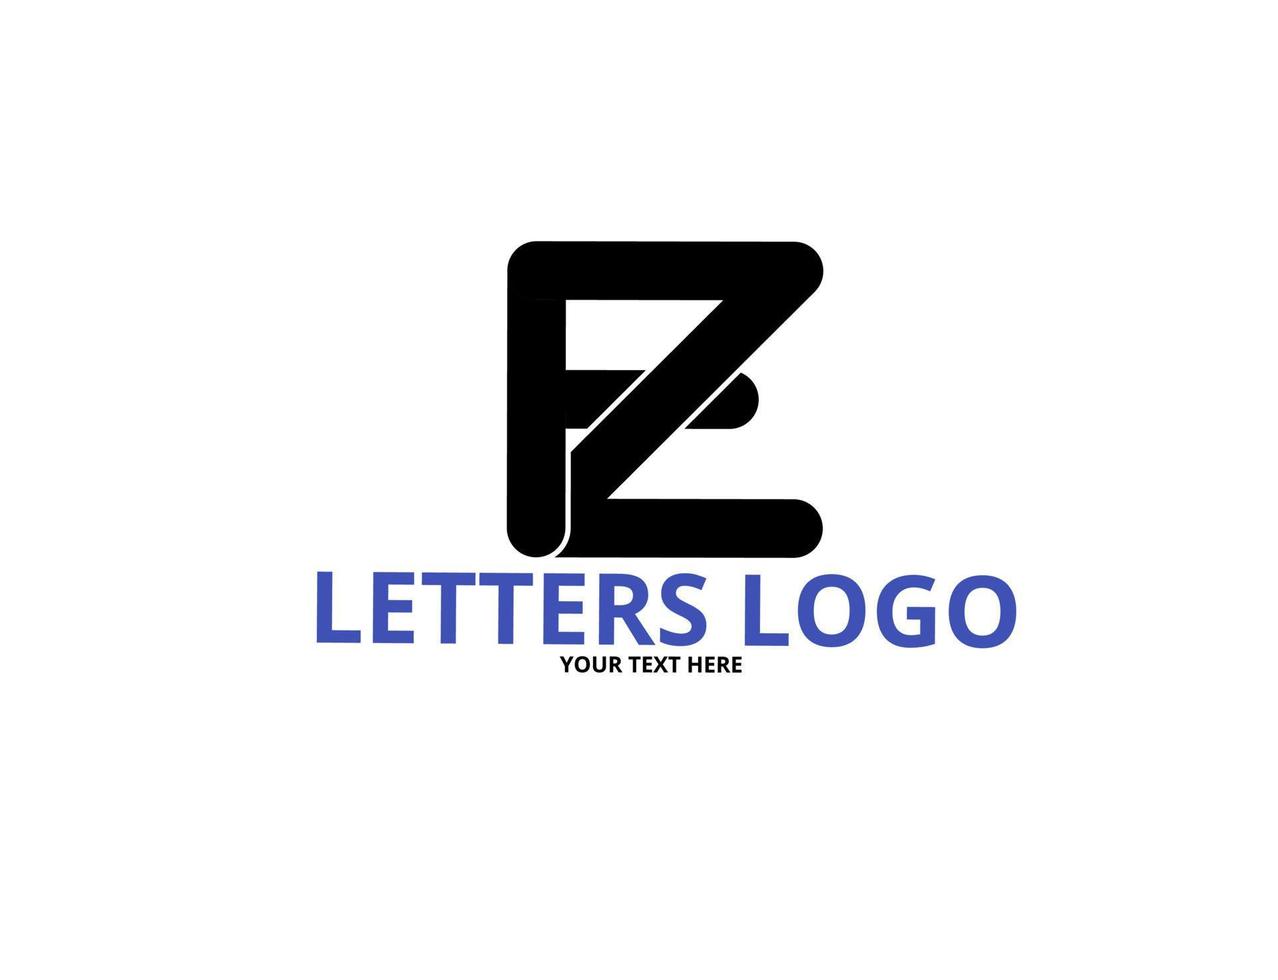 fz zf f z initial letter logo vector